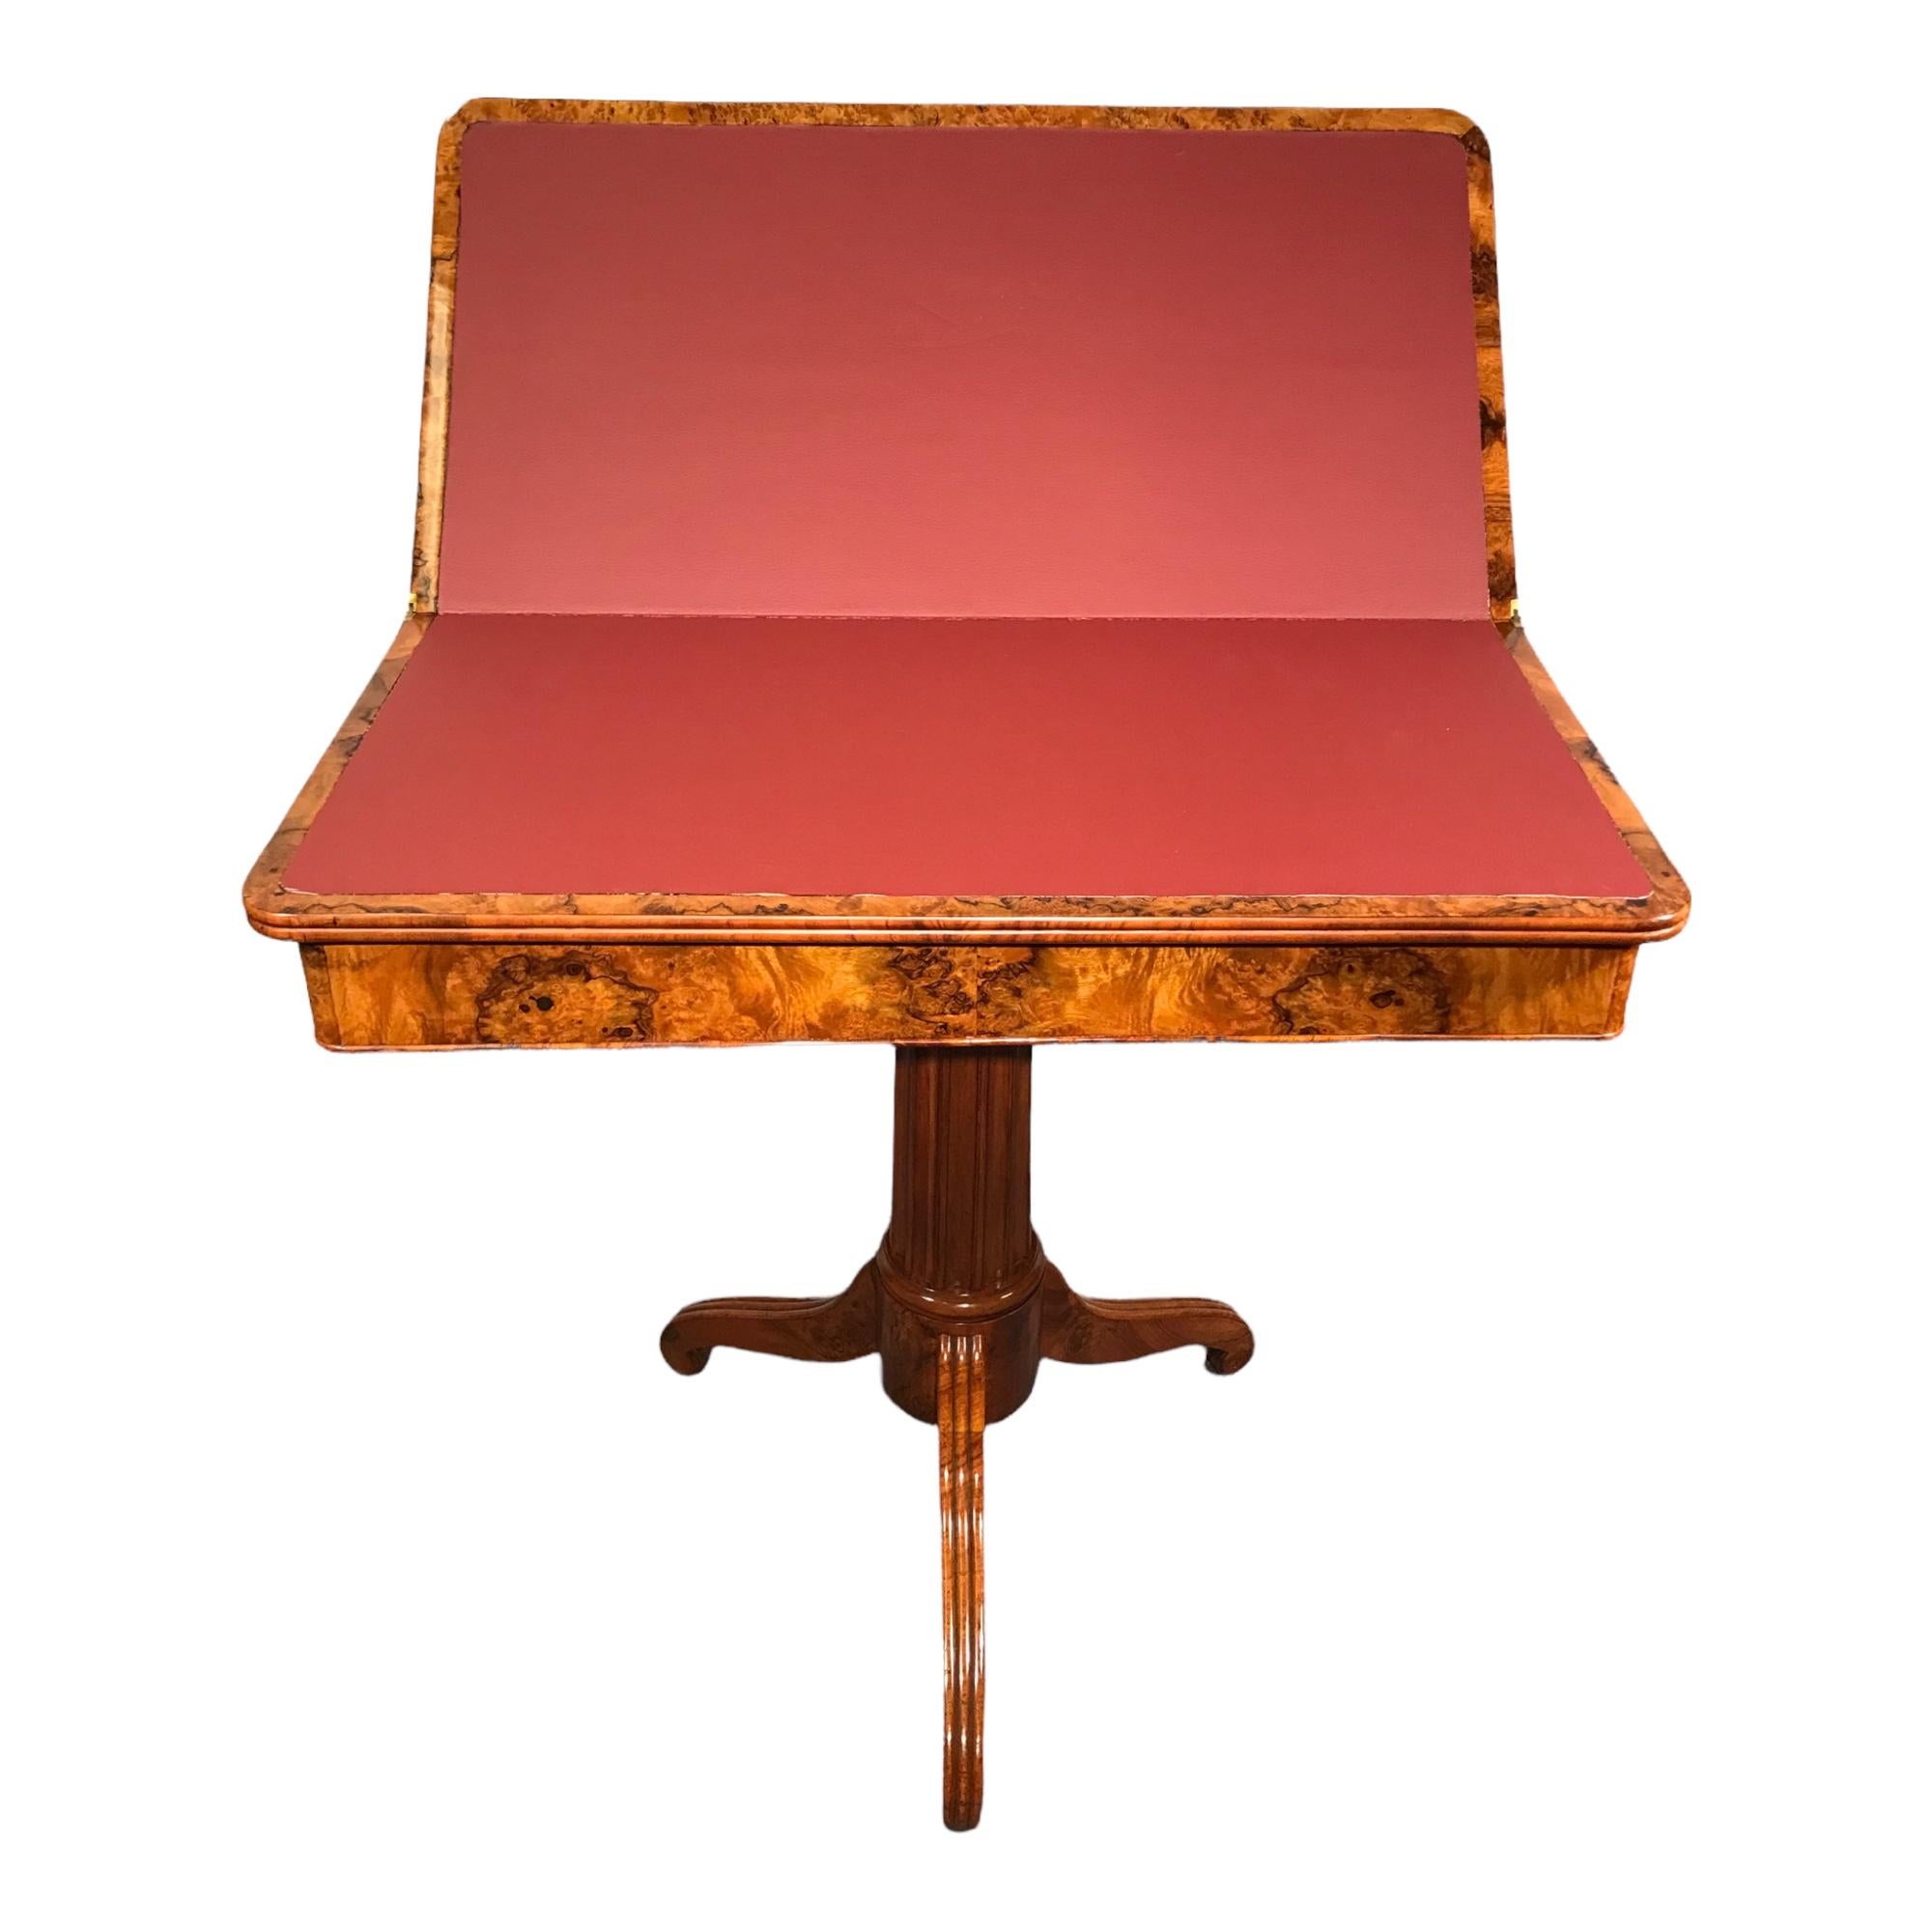 Biedermeier Early 19th Century Game Table, South German, 1810-20 For Sale